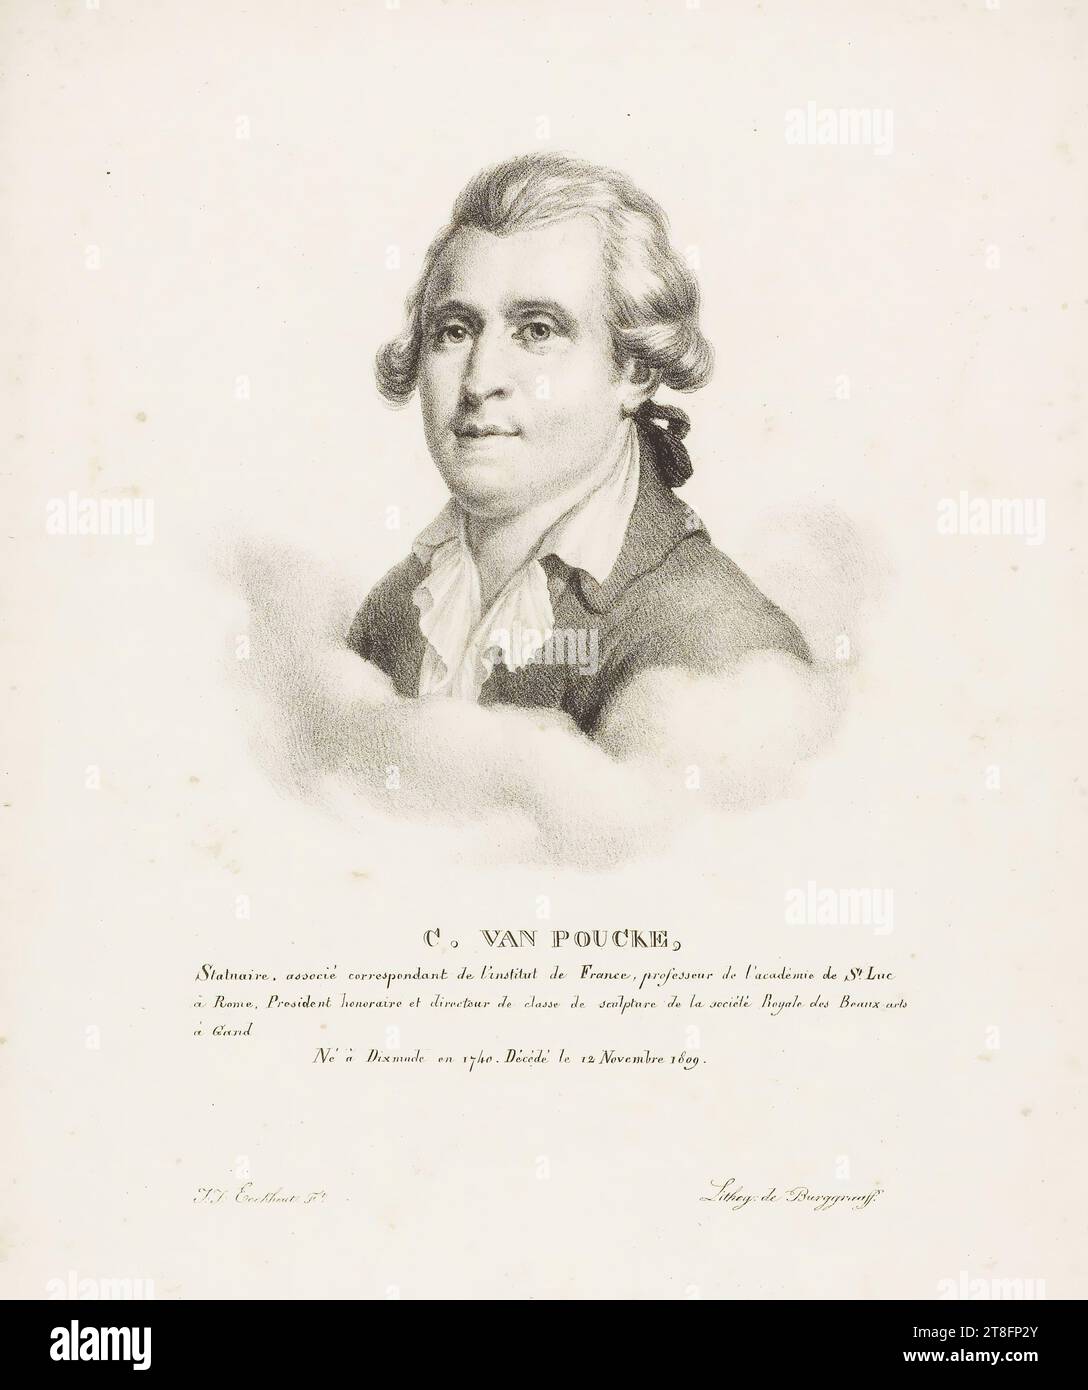 C. VAN POUCKE, Statnaire, corresponding associate of the Institut de France, professor of the Academy of St. Luc, in Rome, Honorary President and director of the sculpture class of the Royal Society of Fine Arts, in Ghent, Born in Dixmunde in 1740. Died November 12, 1809. J.J. Eeckhout Ft. Lithog: de Burggraaff. illustration from: Collection of portraits of modern artists, born in the Kingdom of the Netherlands, drawn from nature by J. J. Eeckhout, and lithographed by G. P. Van den Burggraaff. Brussels 1822 Stock Photo